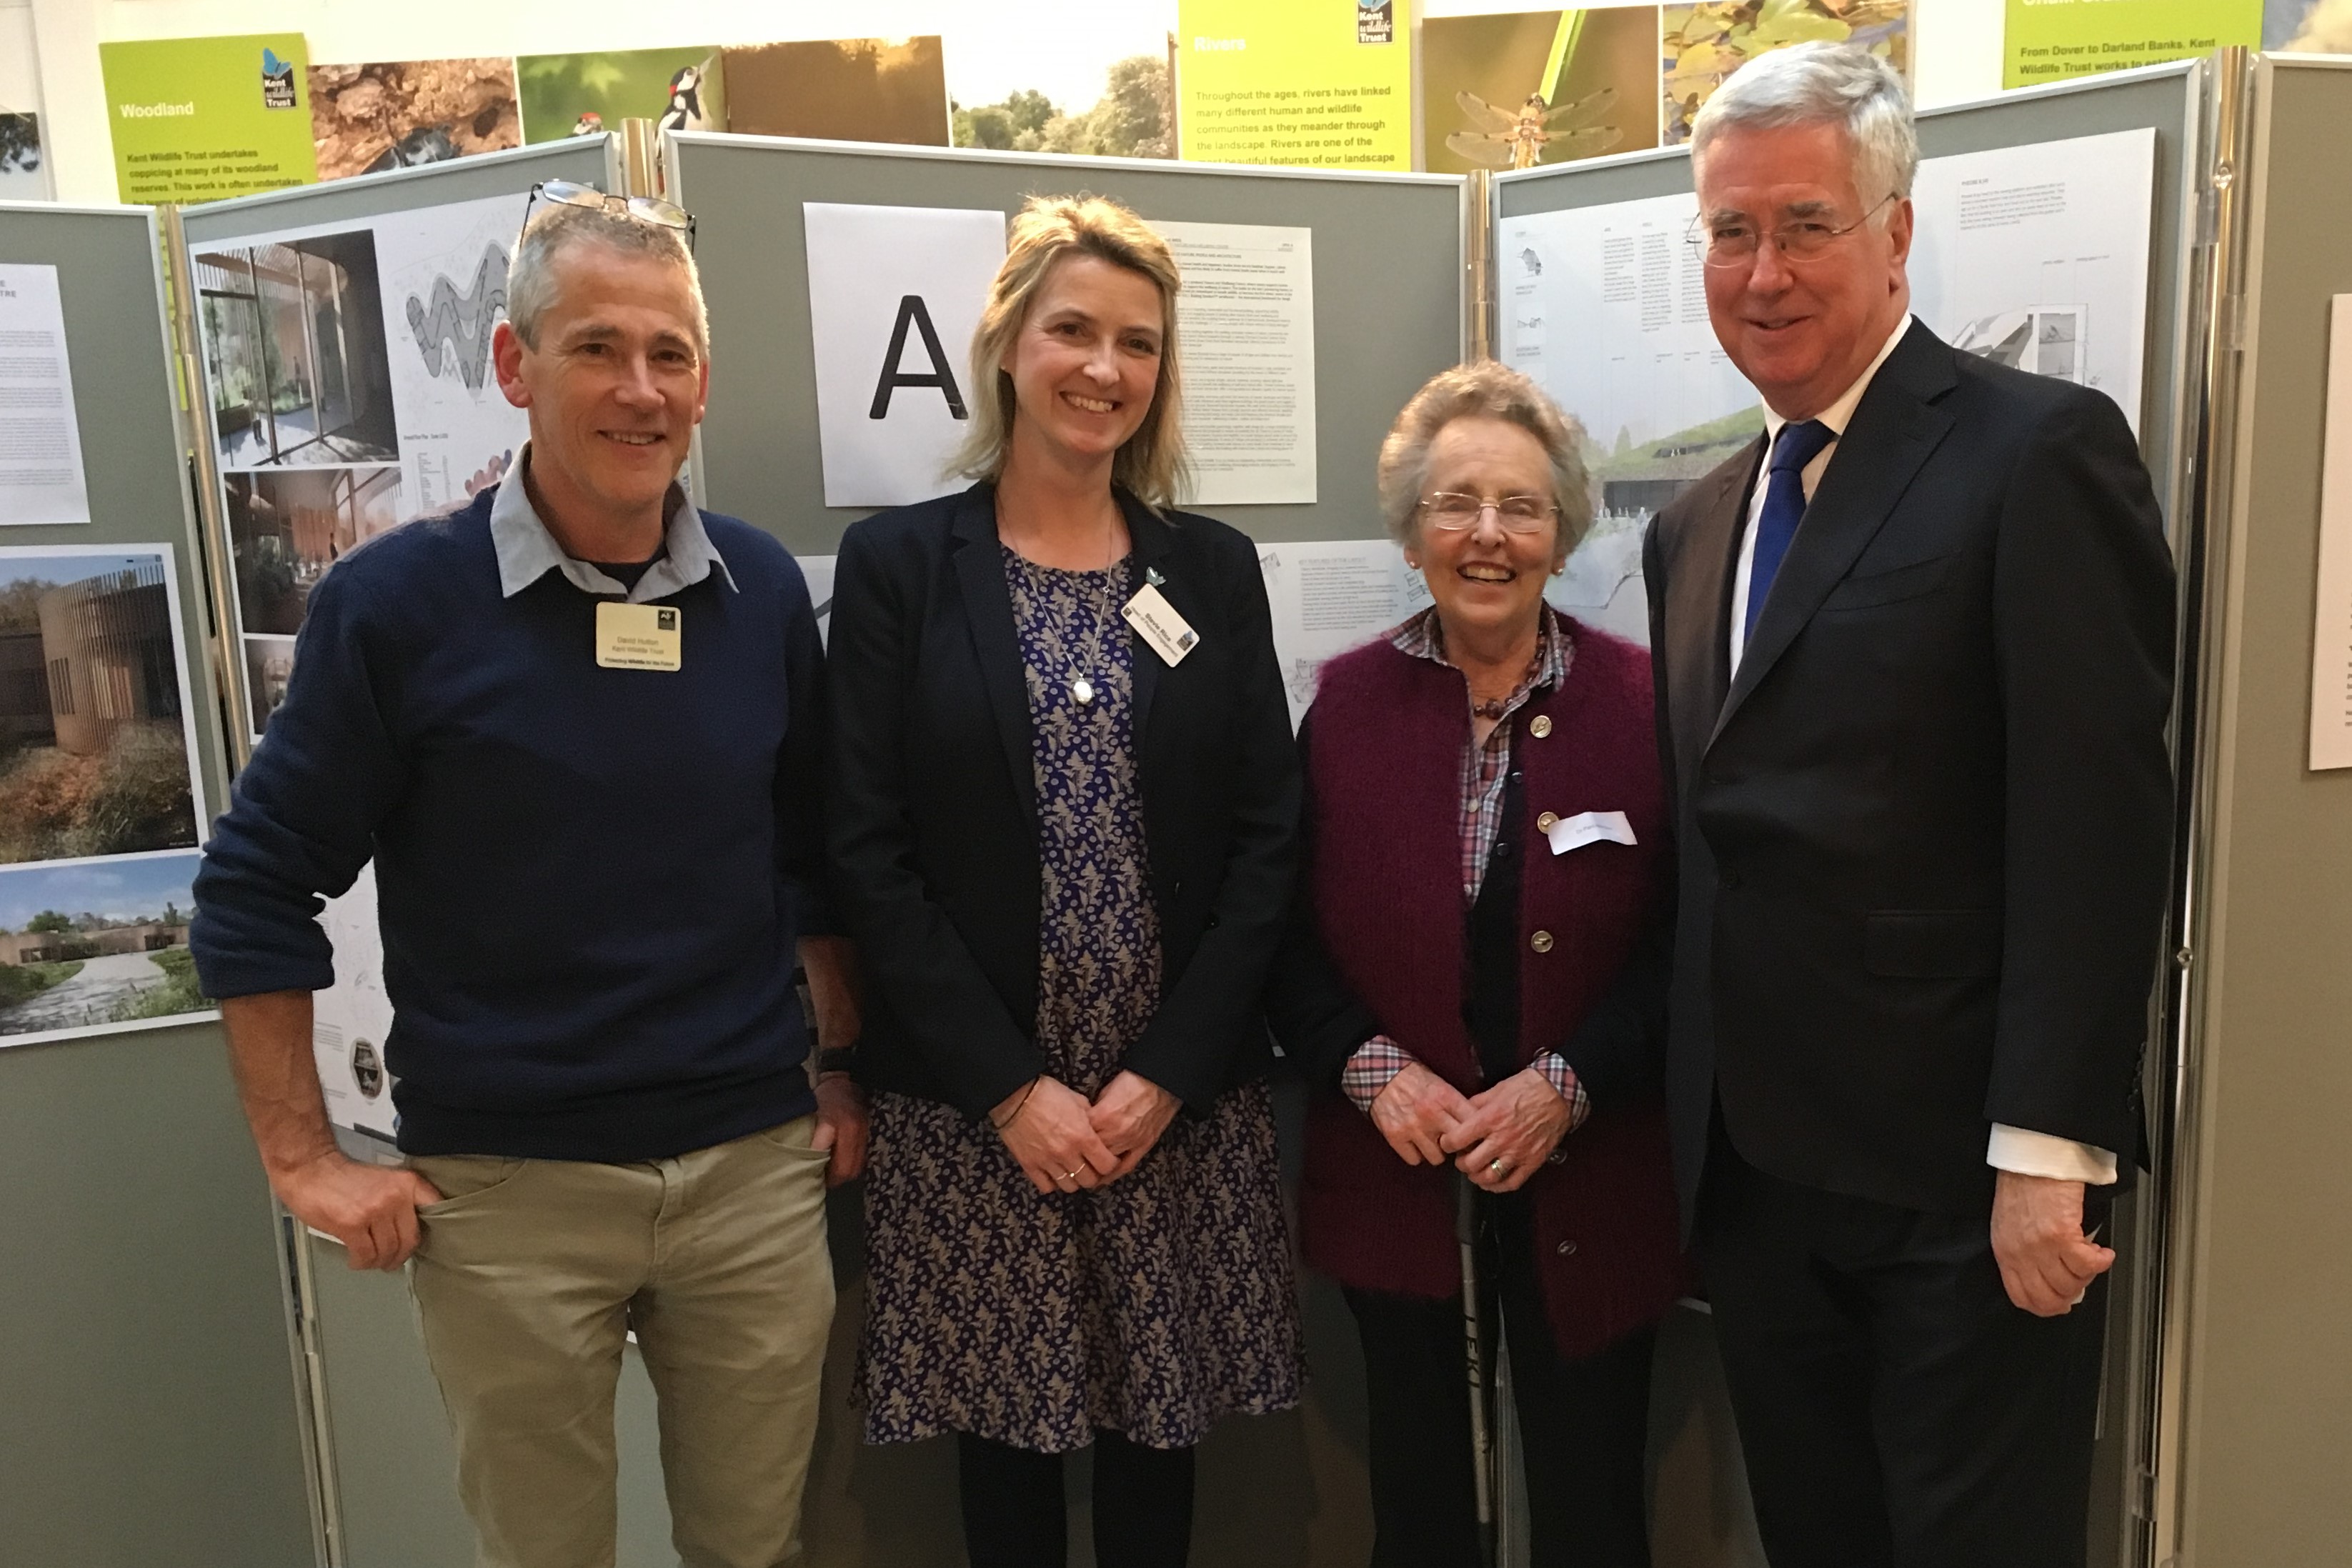 Dave Hutton and Stevie Rice from Kent Wildlife Trust with Dr Pamela Harrison and Michael at the Jeffery Harrison Visitor Centre, Bradbourne Vale Road, Sevenoaks, TN13 3DH